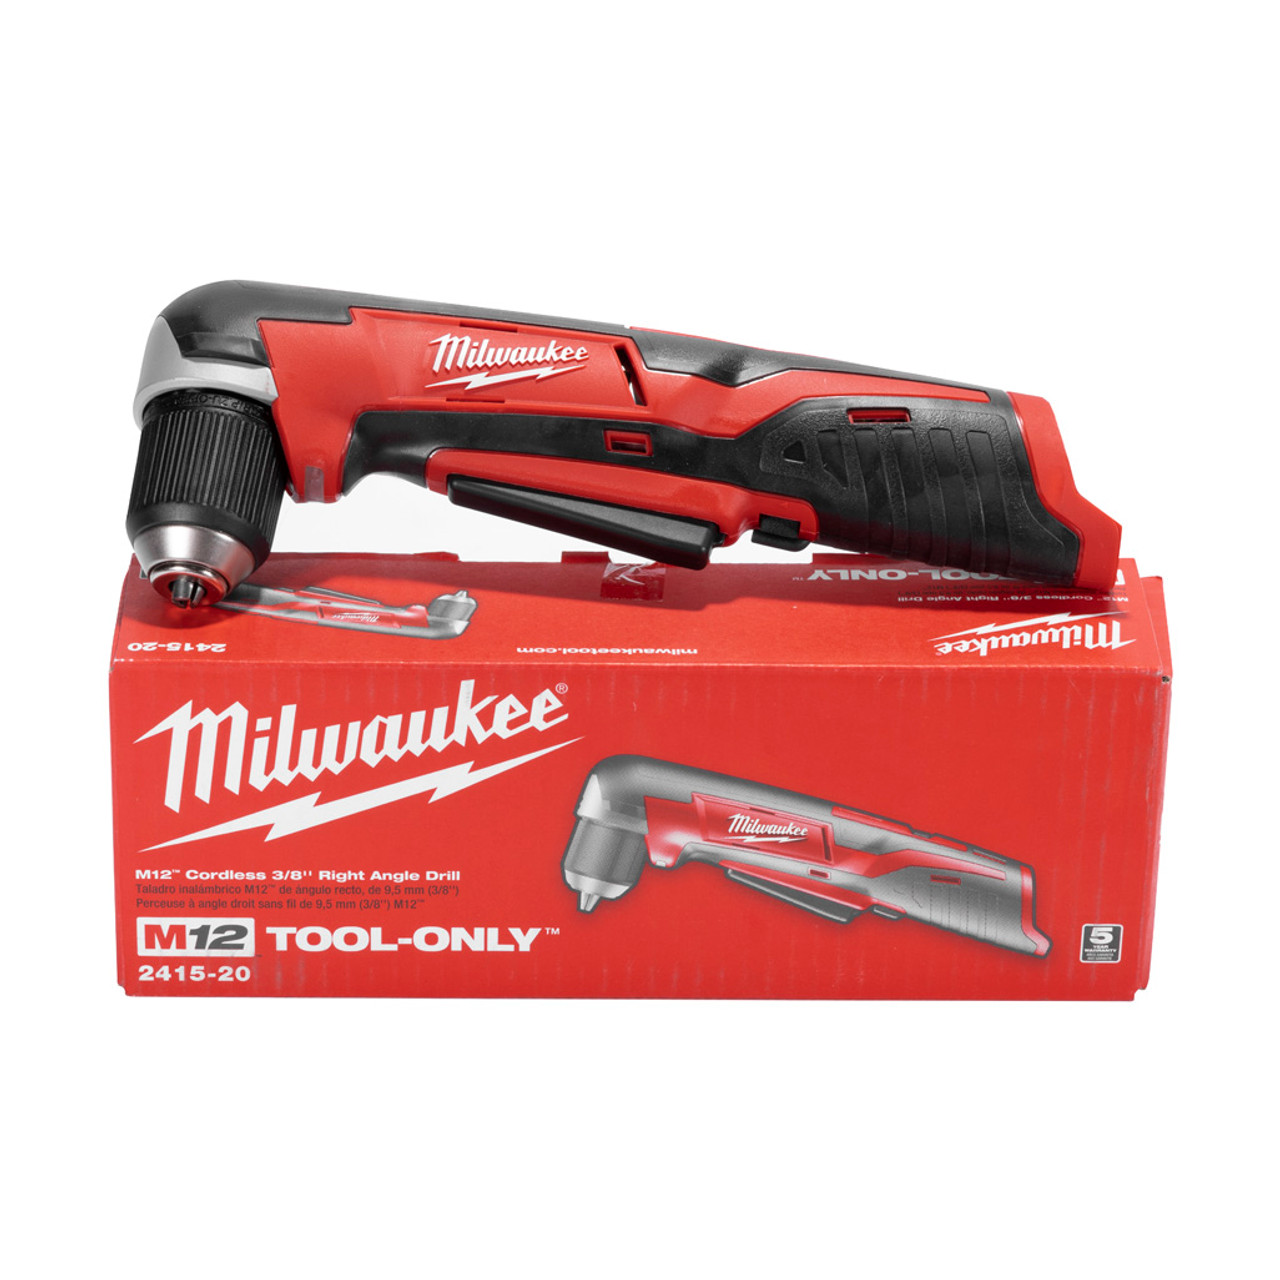 https://cdn11.bigcommerce.com/s-f4083/images/stencil/1280x1280/products/181230/276441/2415-20-milwaukee-m12-bare-tool-right-angle-drill__58464.1671115092.jpg?c=2